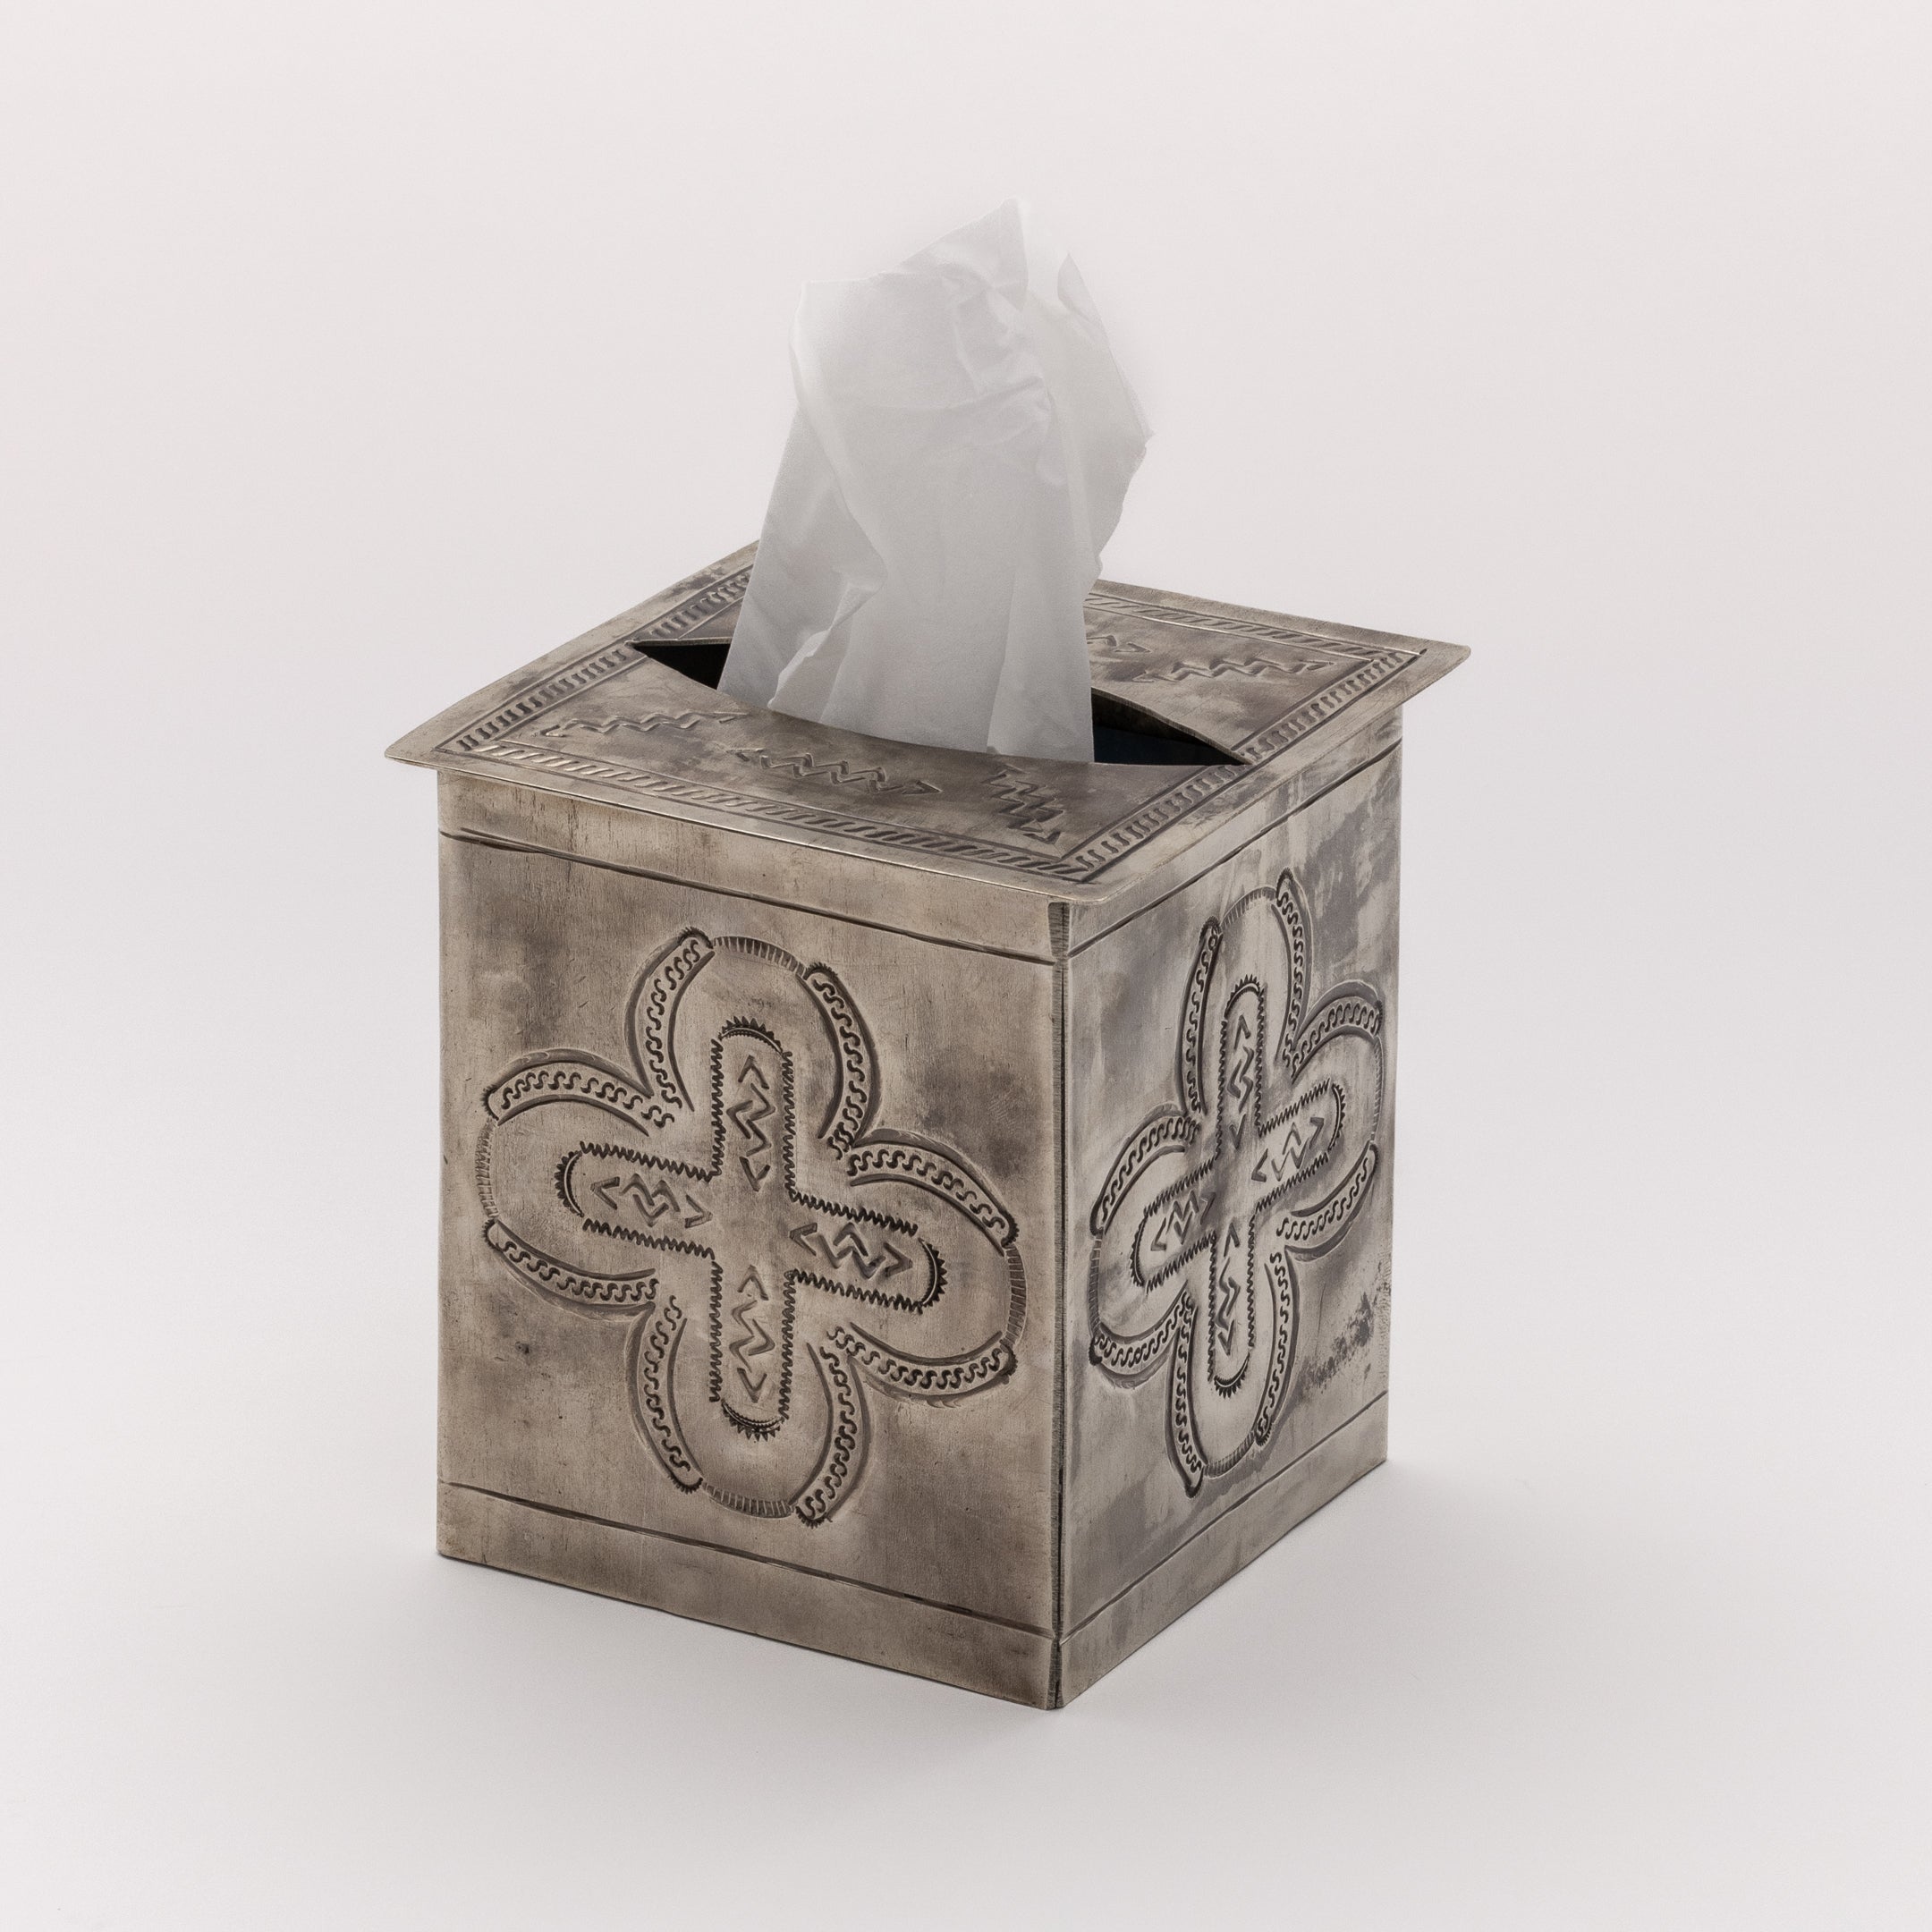 WJA-017 STAMPED TISSUE BOX COVER